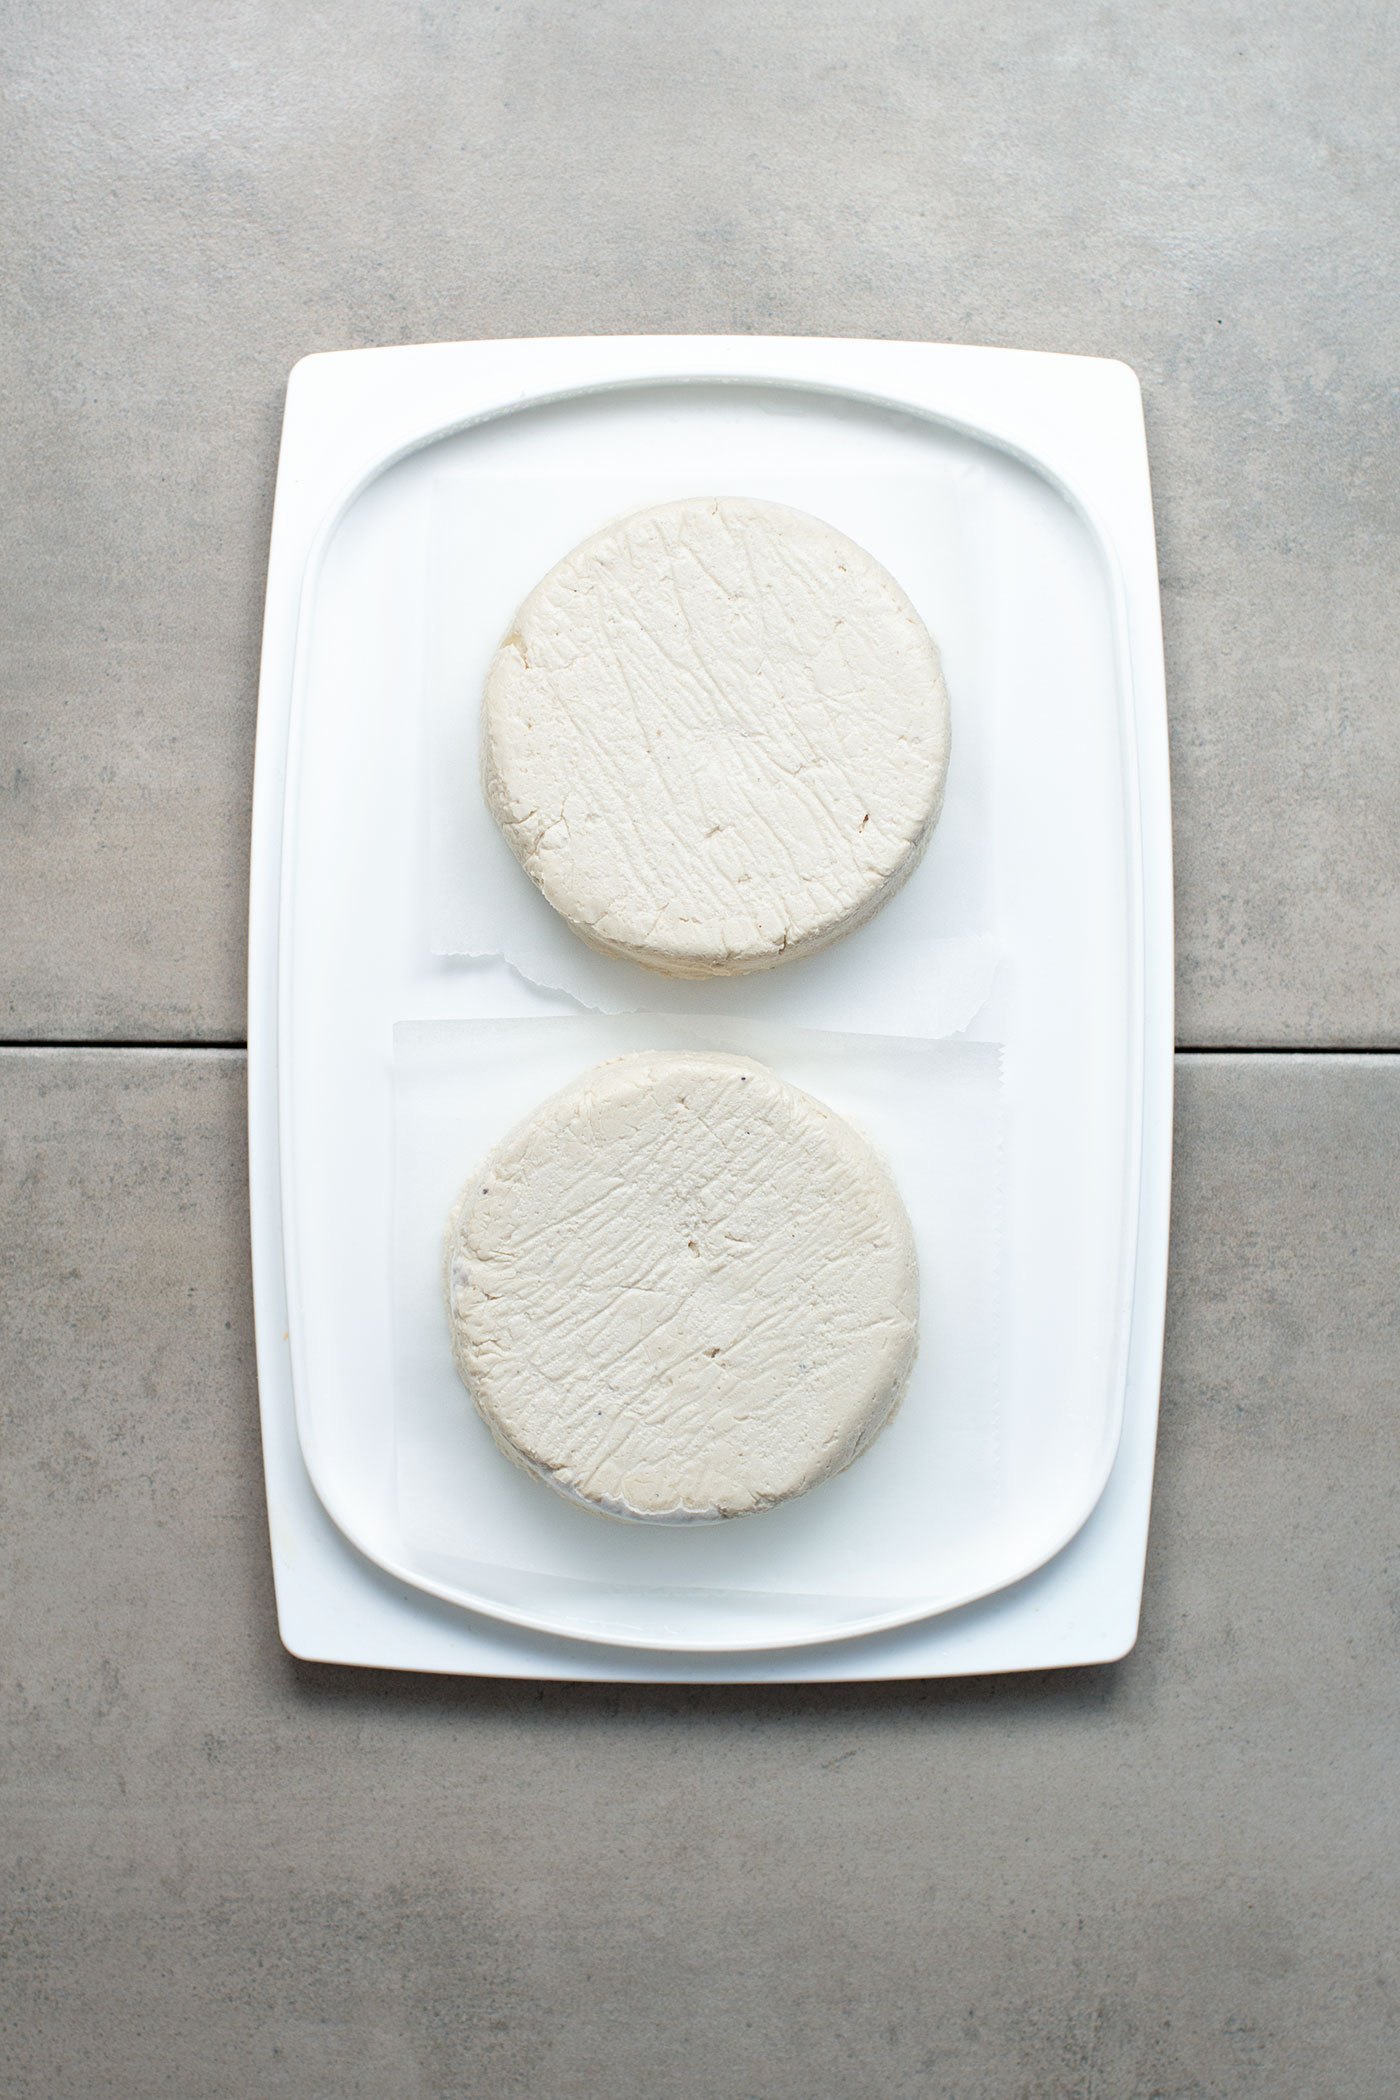 Vegan Washed-Rind Cheese